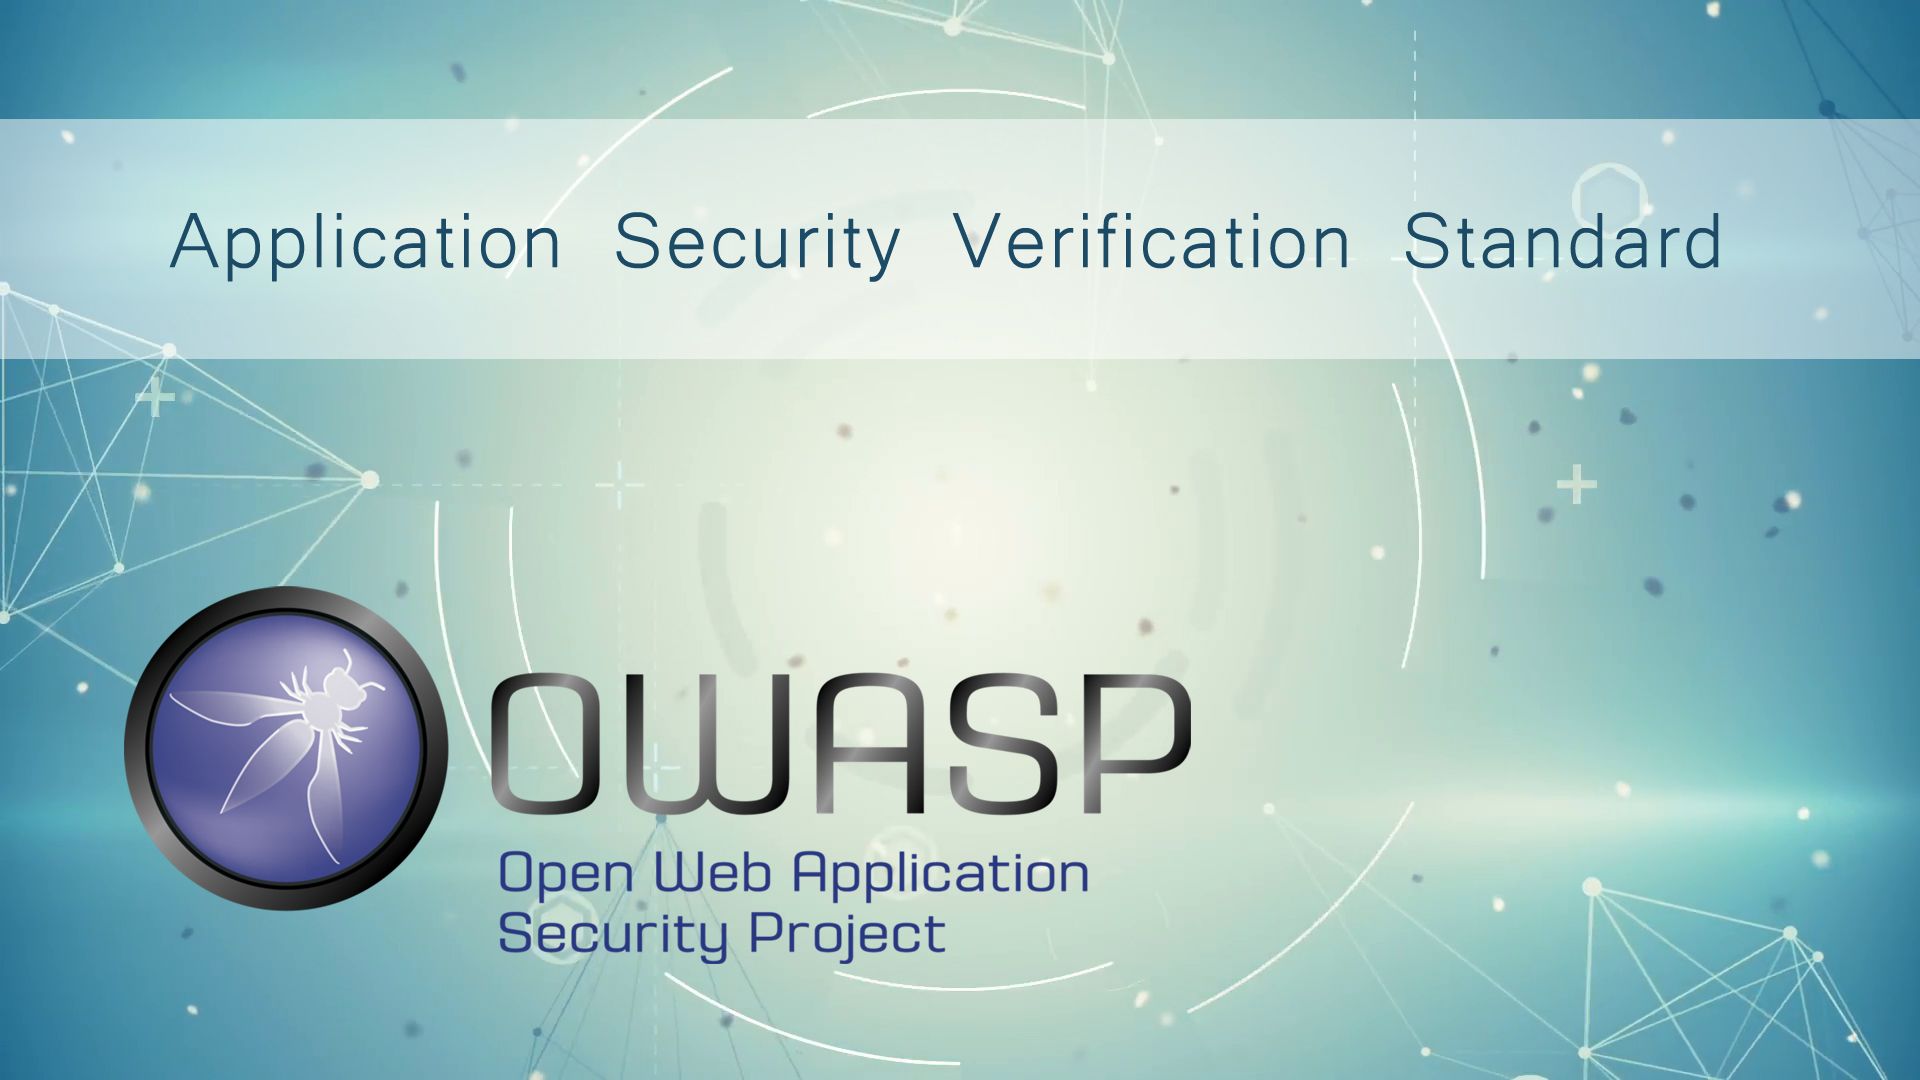 Application Security with OWASP ASVS